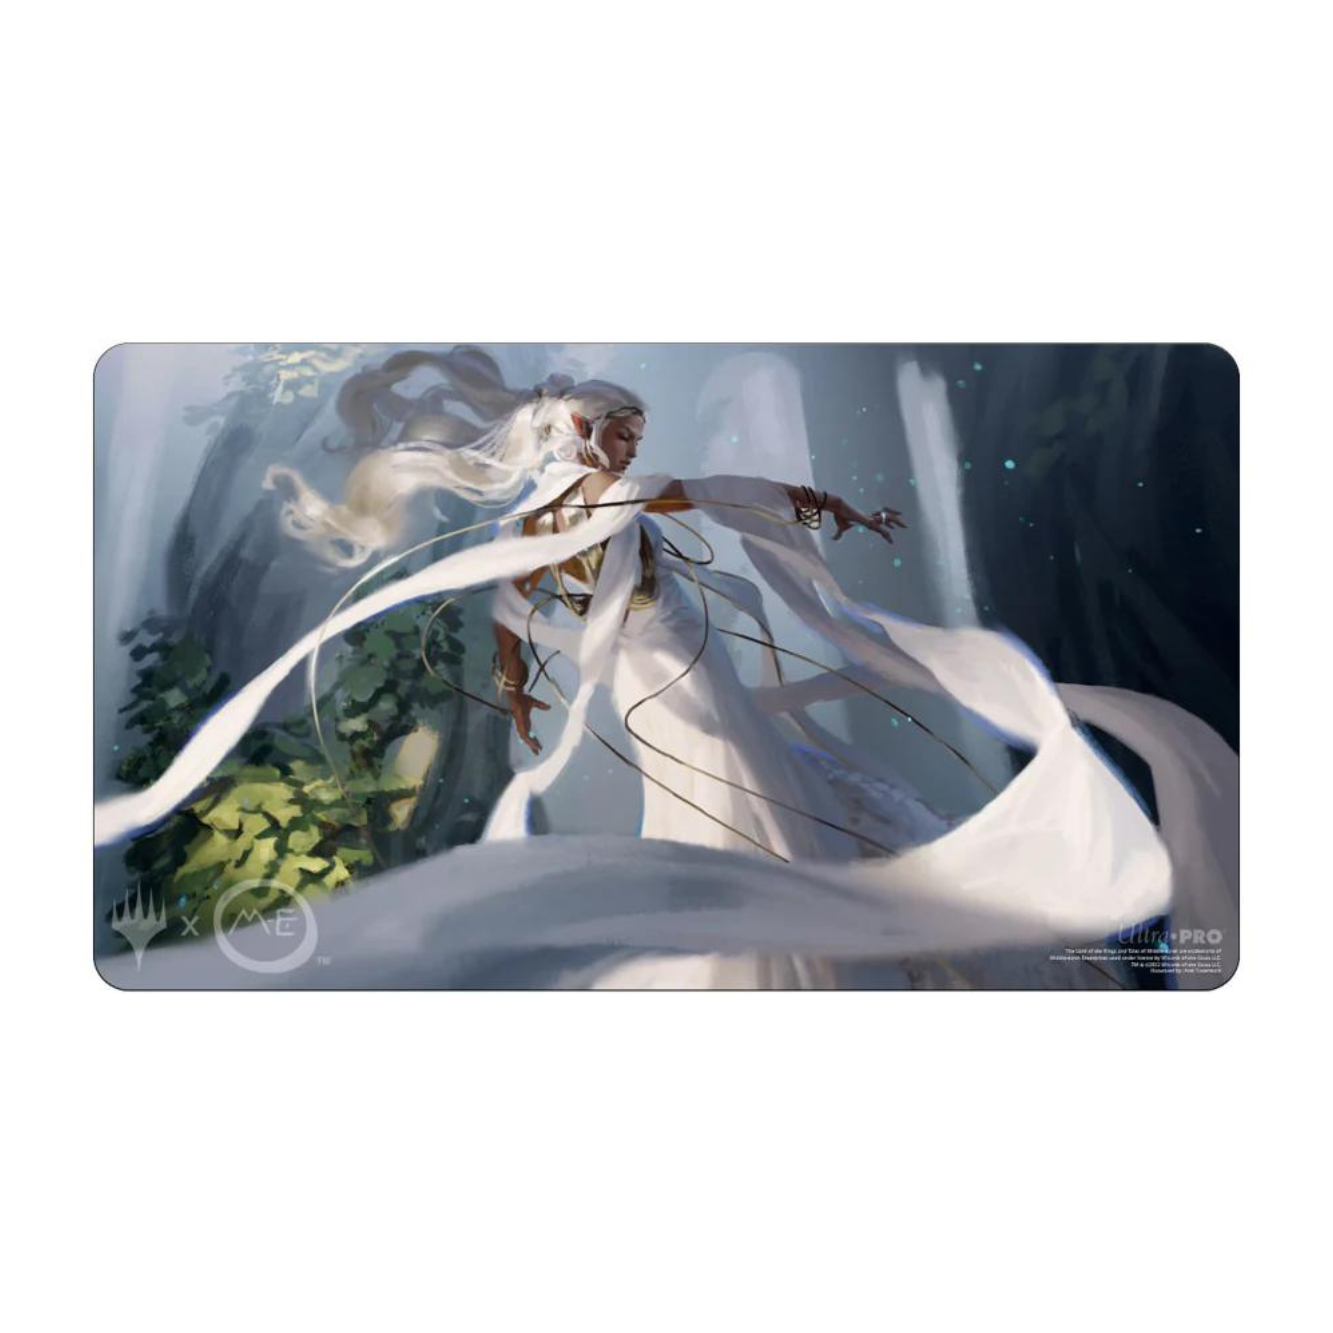 Find many great new  used options and get the best deals for TT345 Fate  Grand Order Playmats Yugioh MTG Pokemon Vanguard A  Anime Anime images  Anime characters